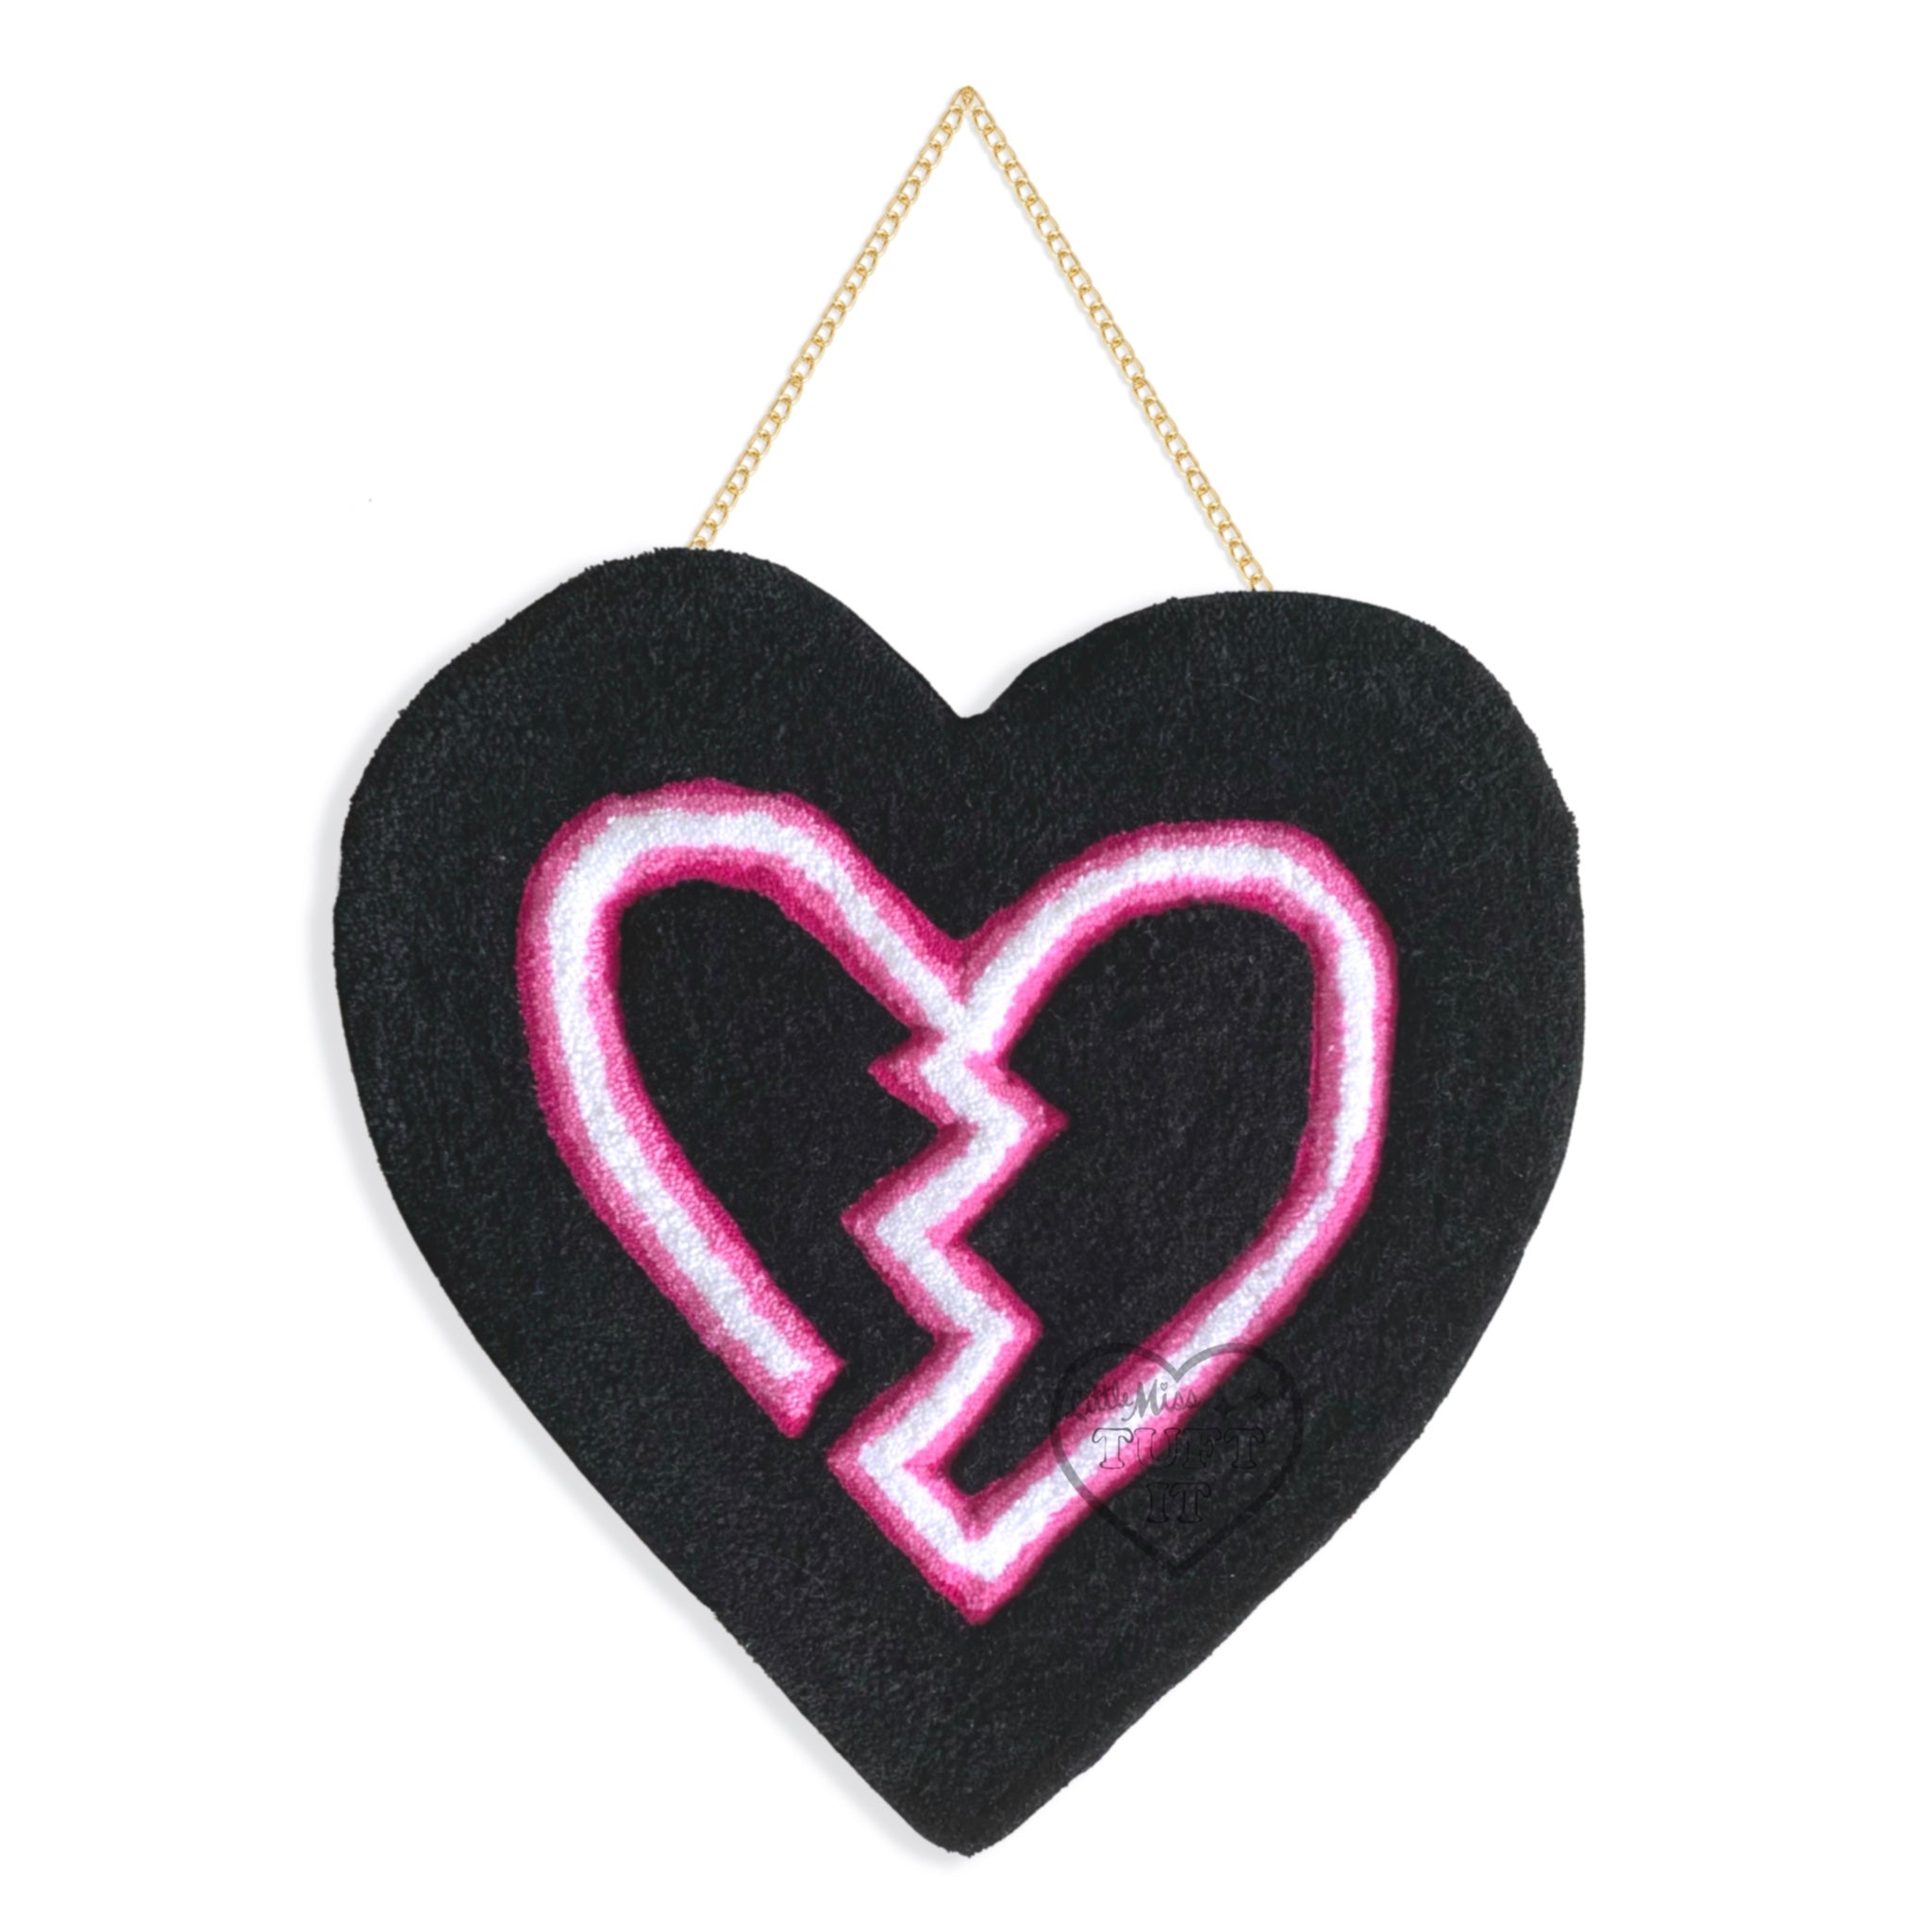 Broken Heart Embroidered Iron On Patch 